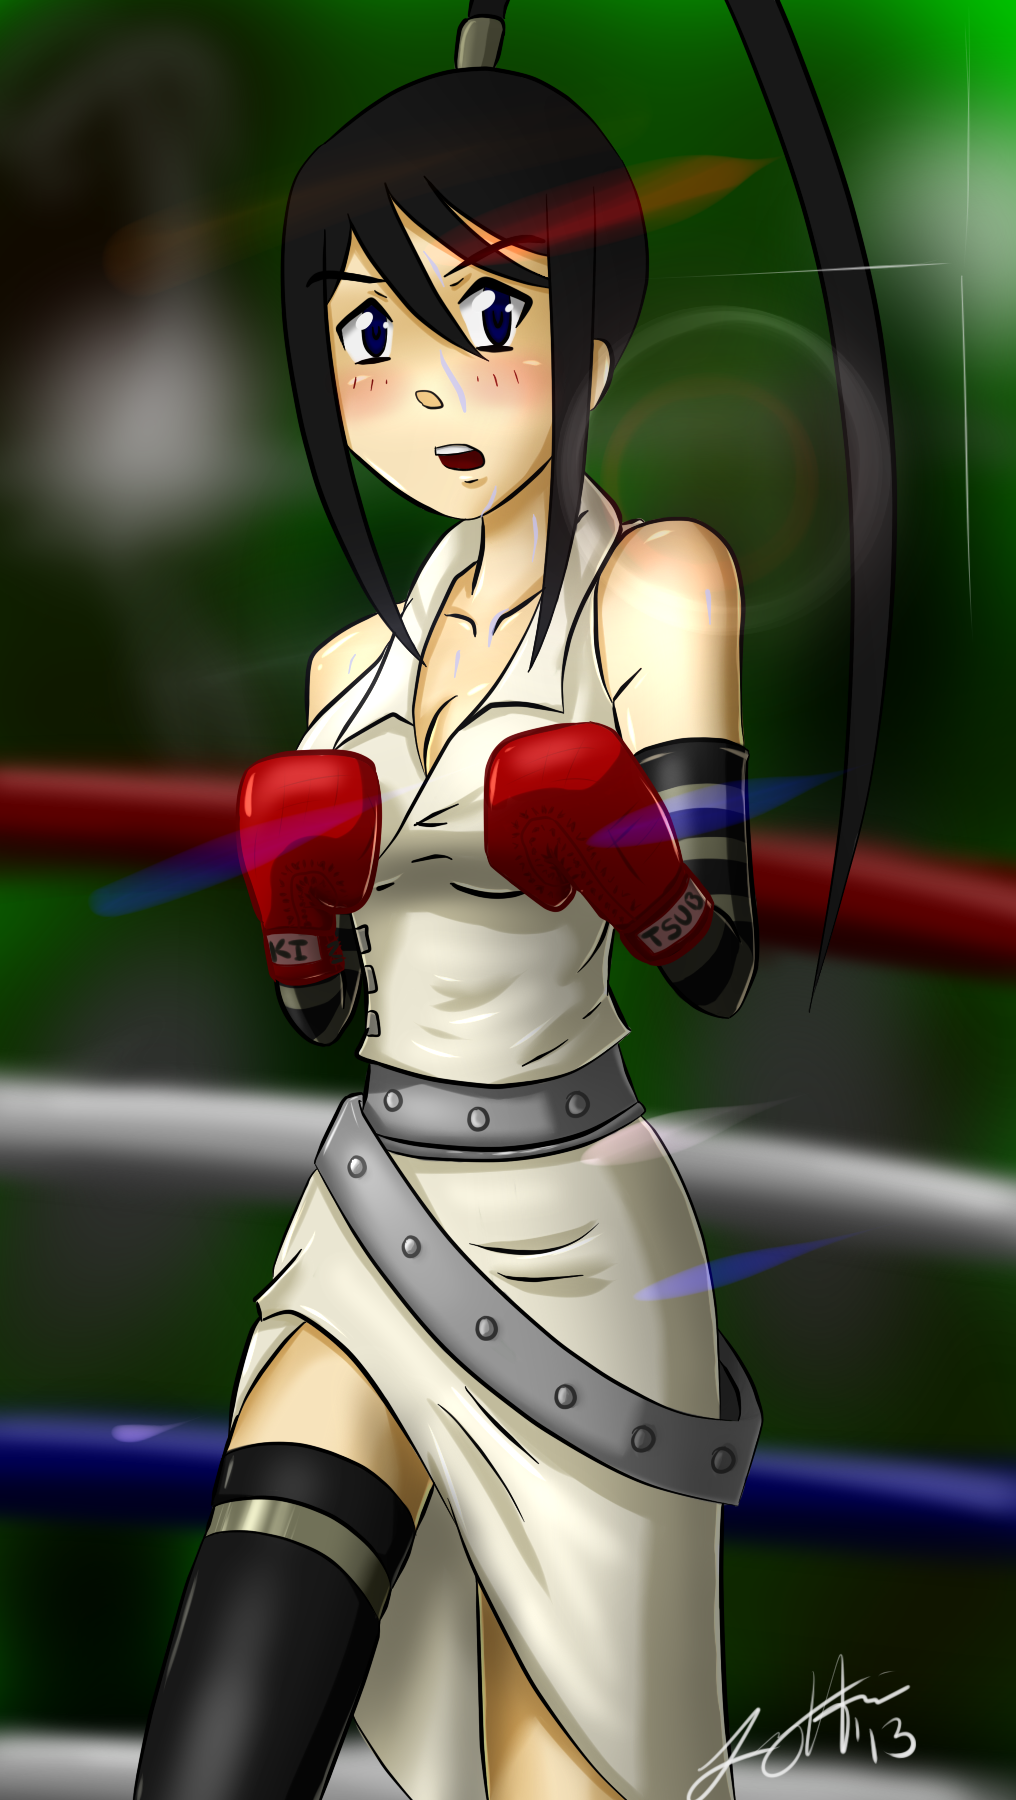 tsubaki_the_boxer_by_deejayx-d6fqweq.png